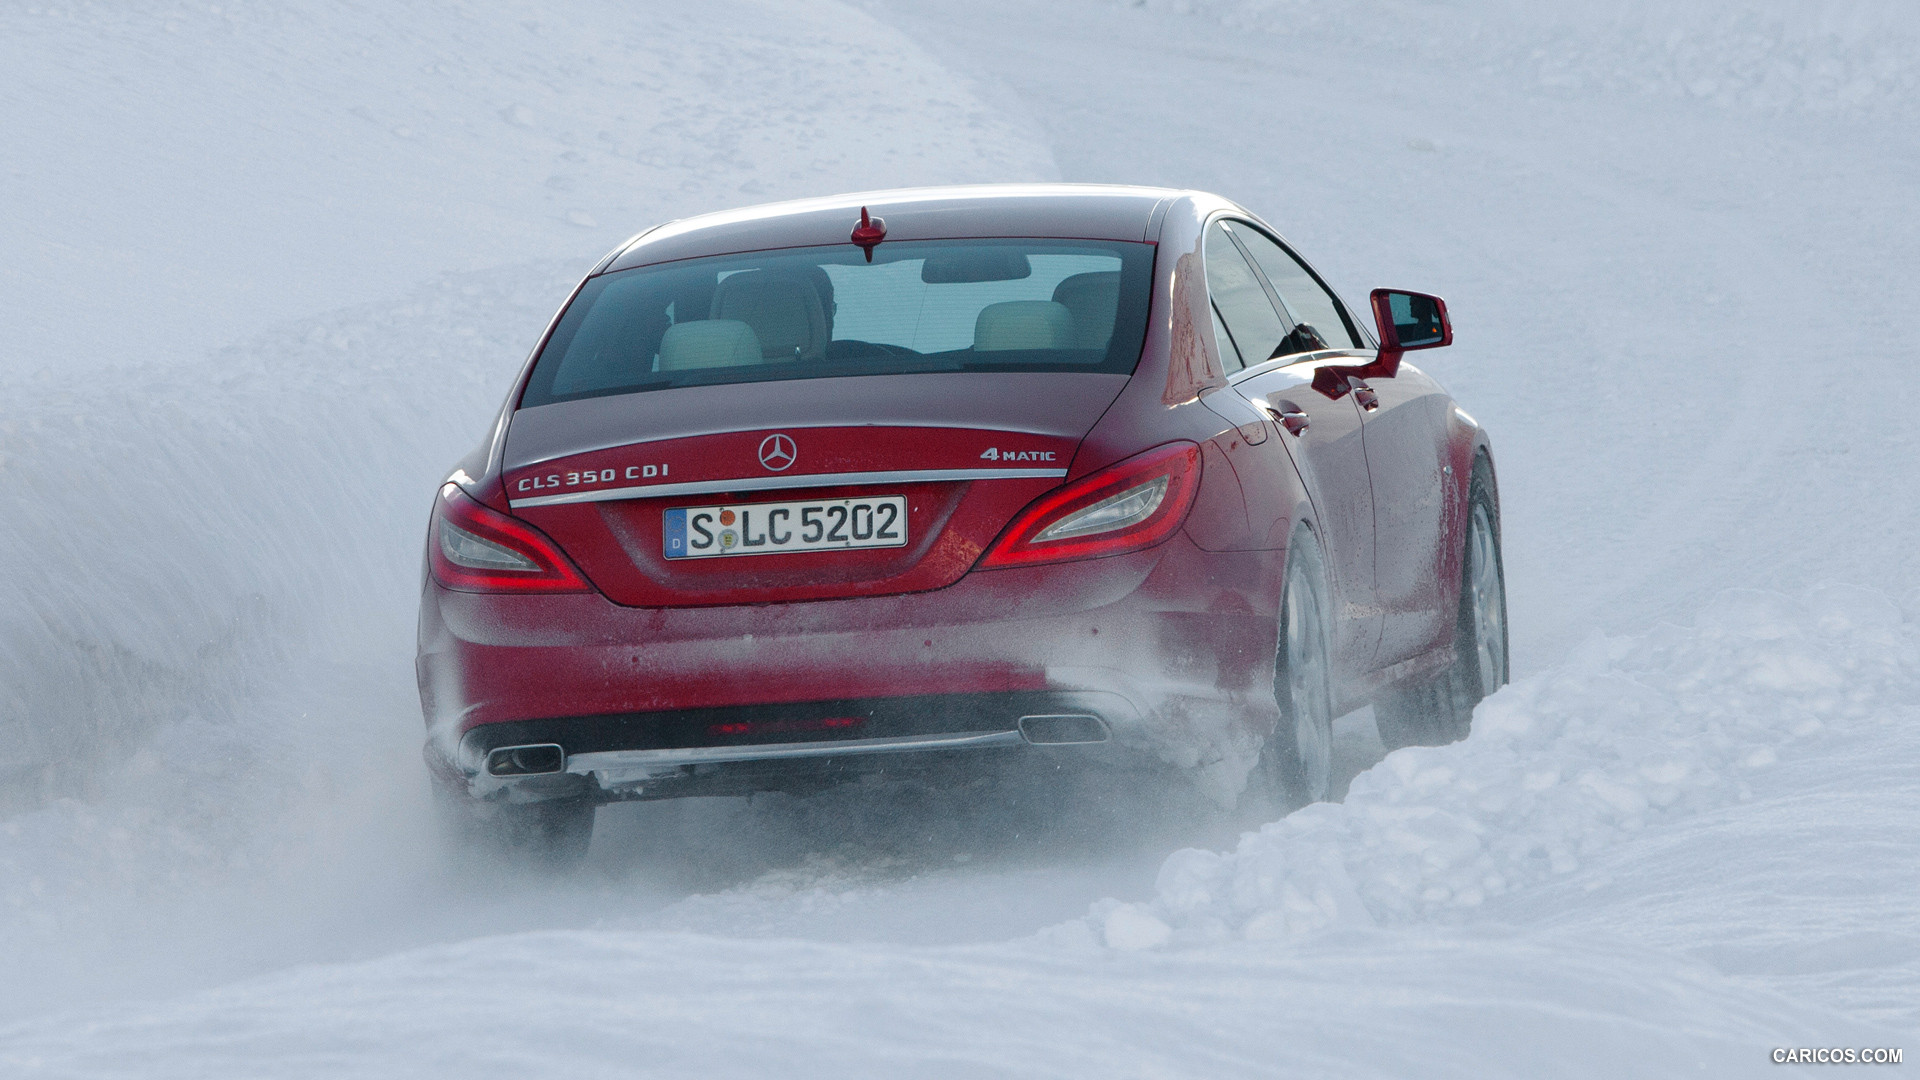 Mercedes-Benz CLS350 CDI 4MATIC (2012)  - Rear Angle , #8 of 15